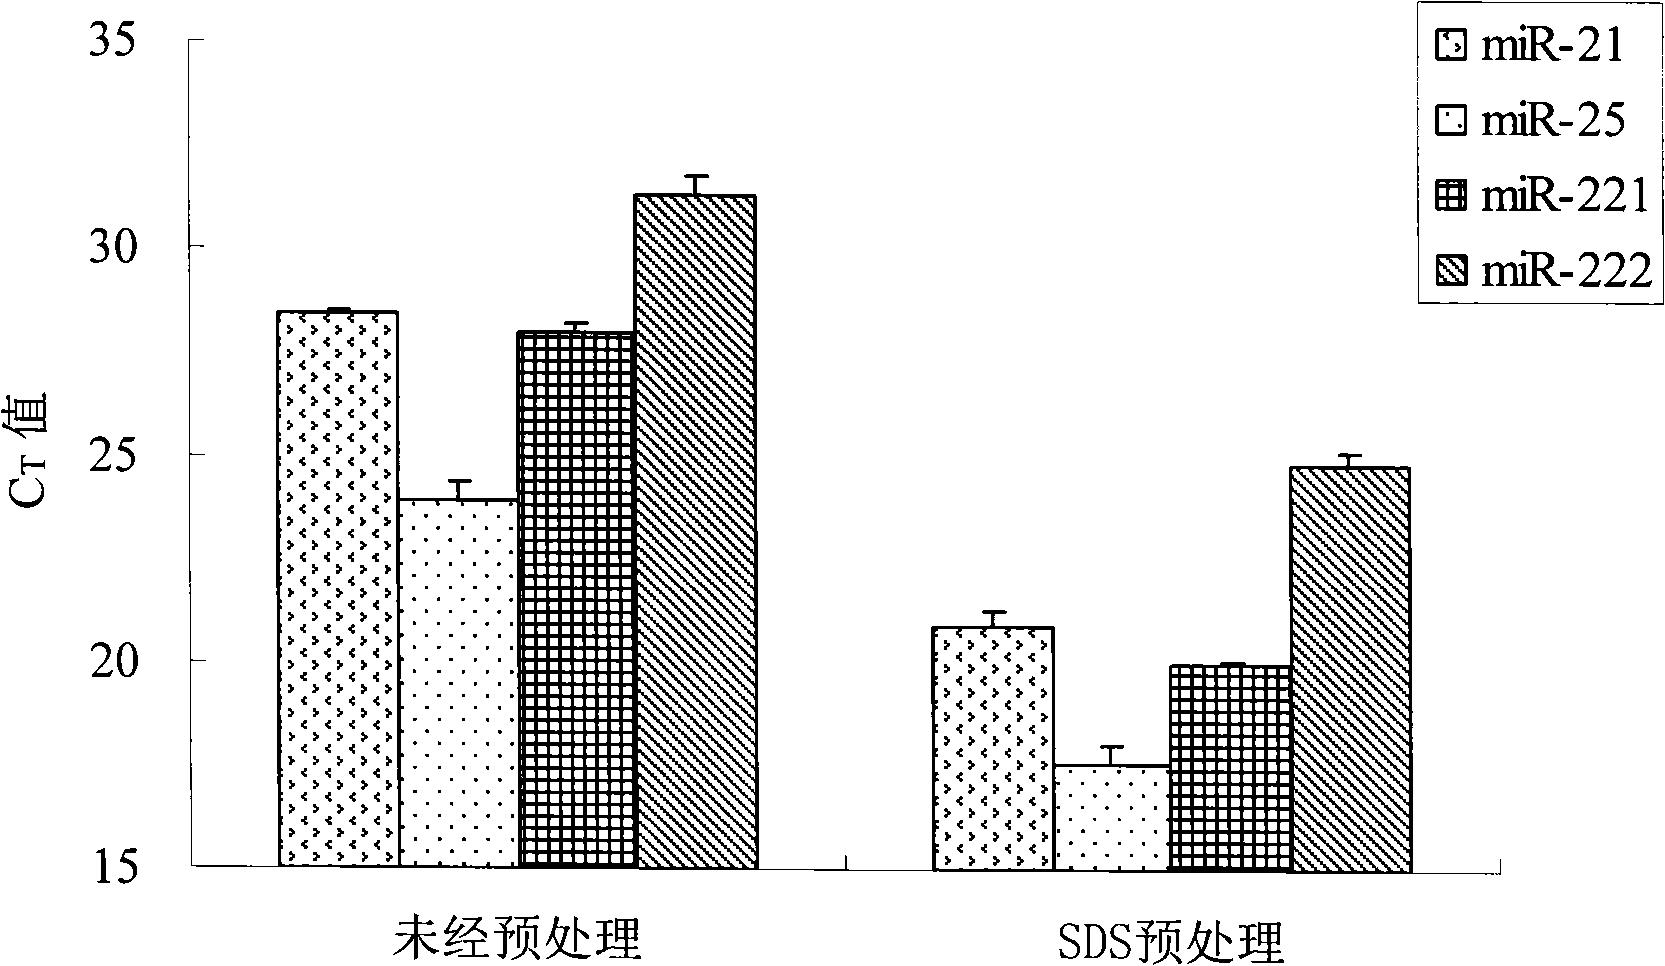 Method for separating RNA (Ribonucleic Acid) from human serum/blood plasma sample and PCR (Polymerase Chain Reaction) verification method thereof